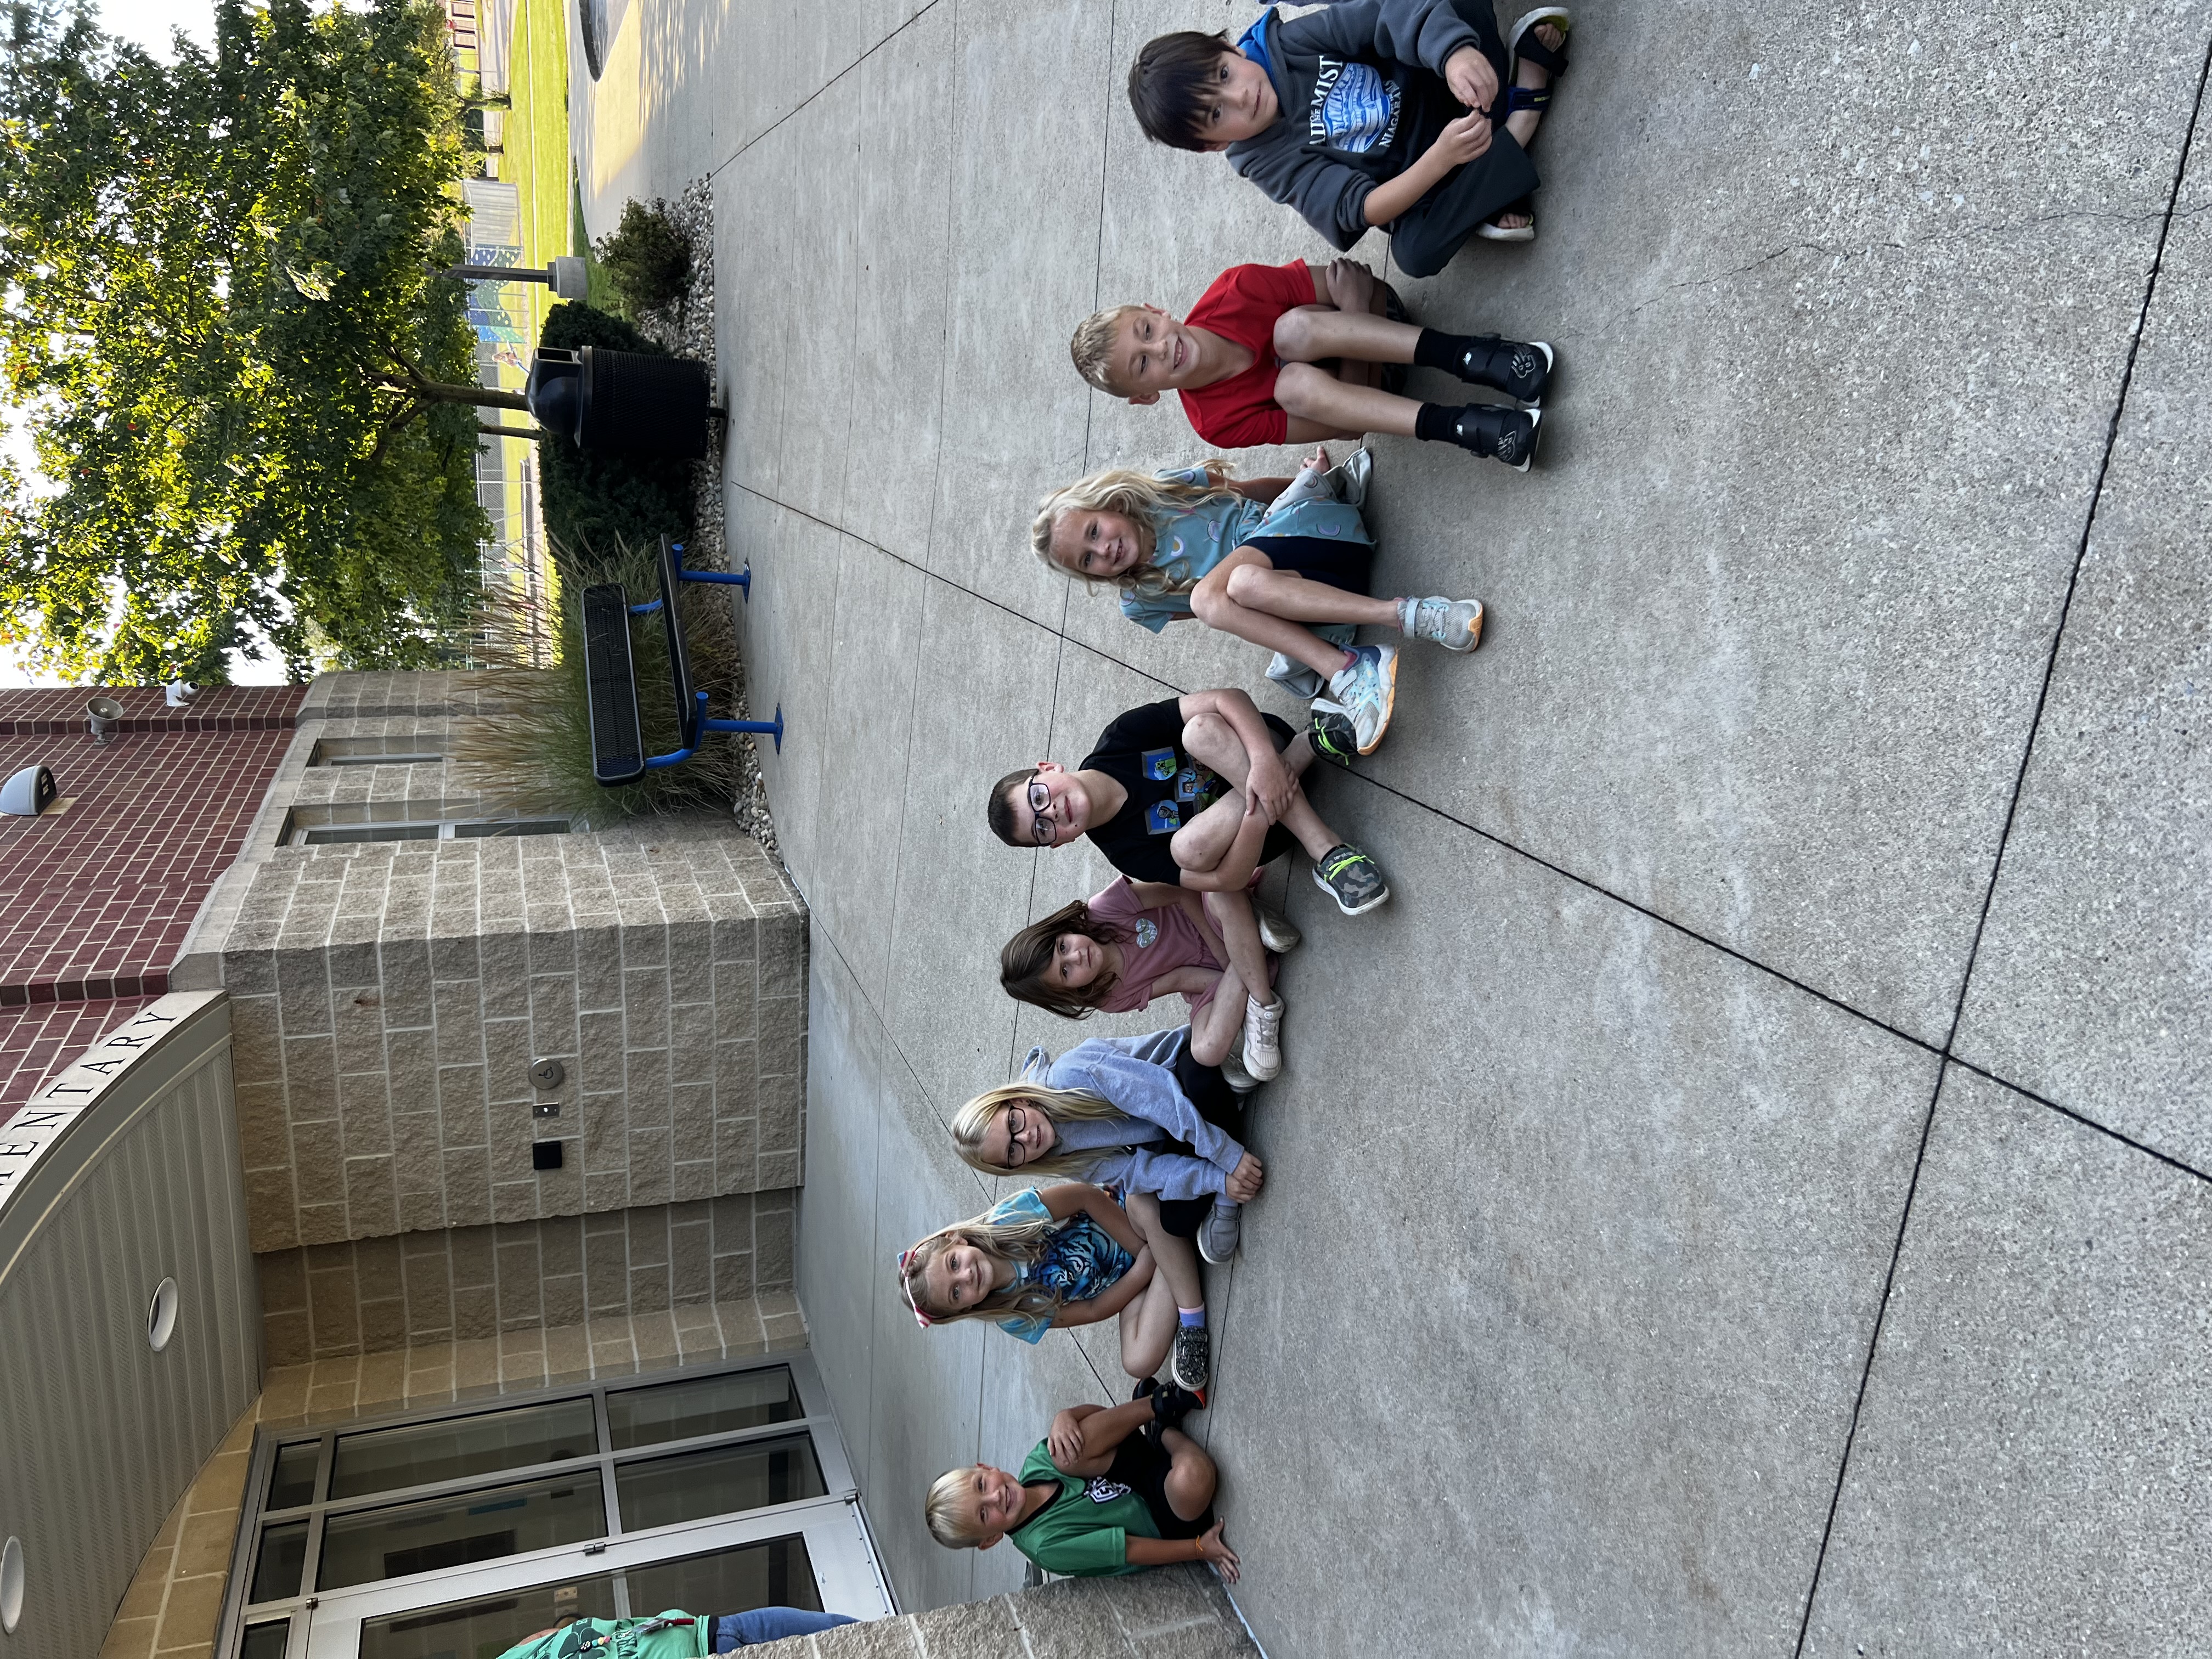 More of Mrs. Neal's students waiting for butterfly release.